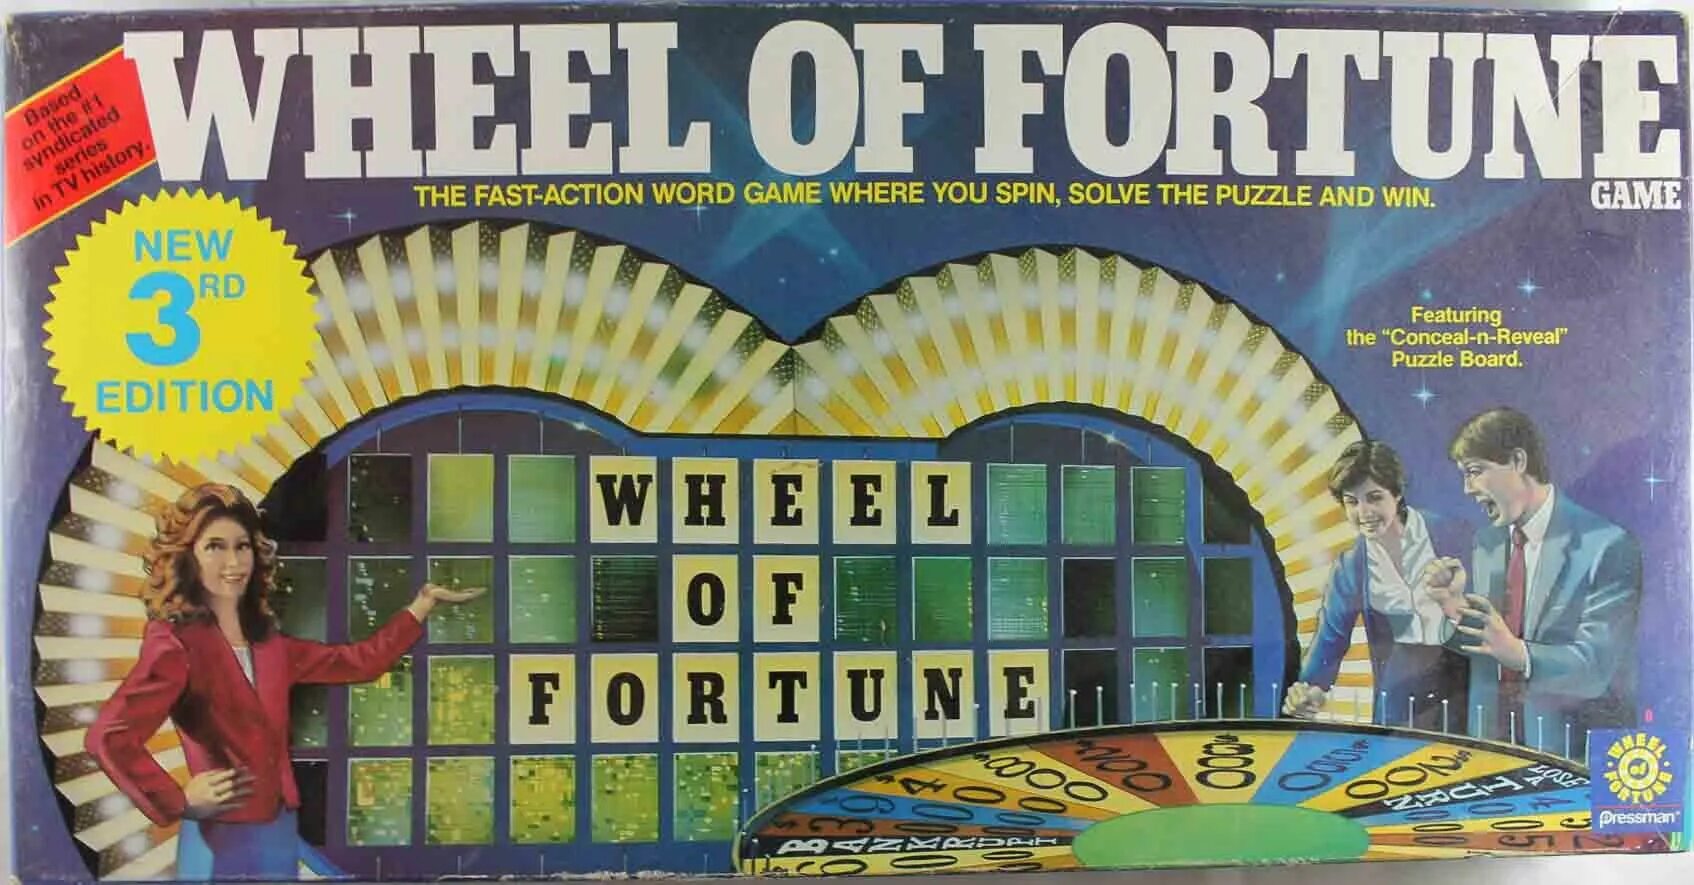 Wheel of fortune ace of base remix. Wheel of Fortune game. Интерактивная игра колесо фортуны. Wheel of Fortune mobile game. Wheel of Fortune Handmade.